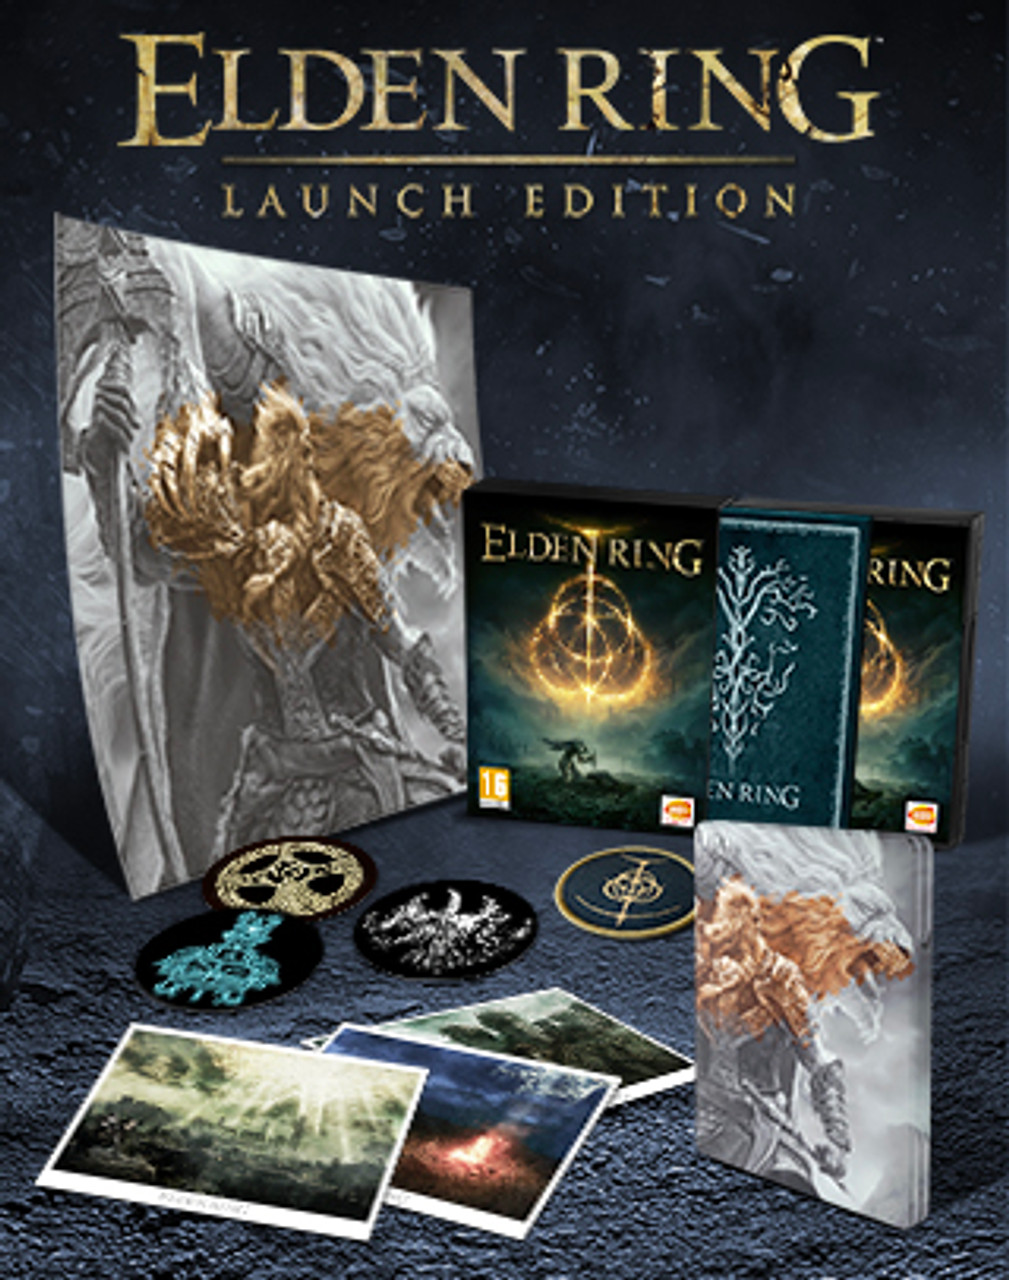 ELDEN RING Physical Full Game [PS4] - STANDARD EDITION EU